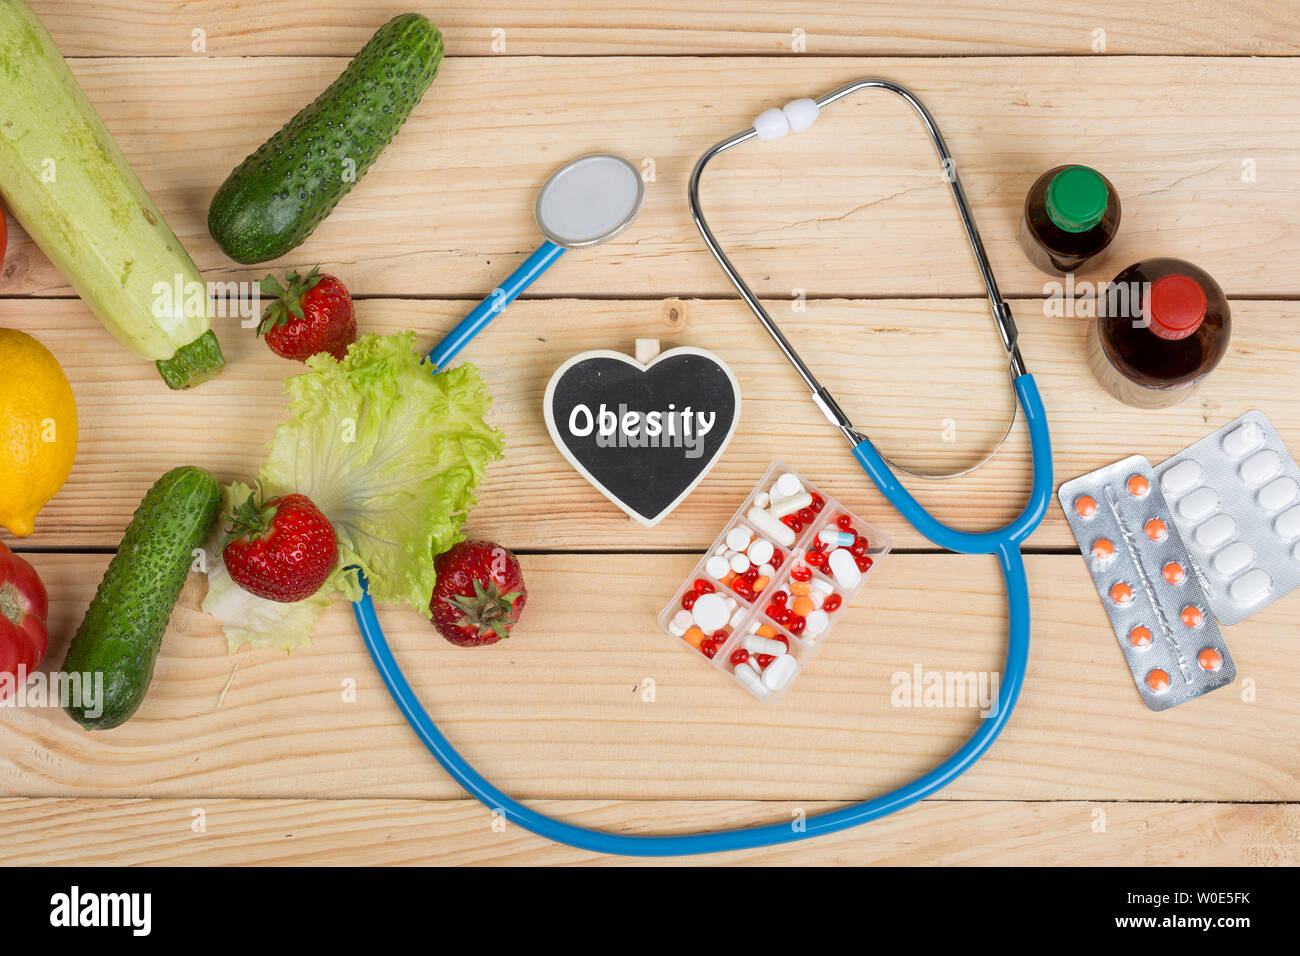 Blackboard in shape of heart with text Obesity, stethoscope and choice between natural vitamins, vegetables, fruits and berries or tablets and pills o Stock Photo